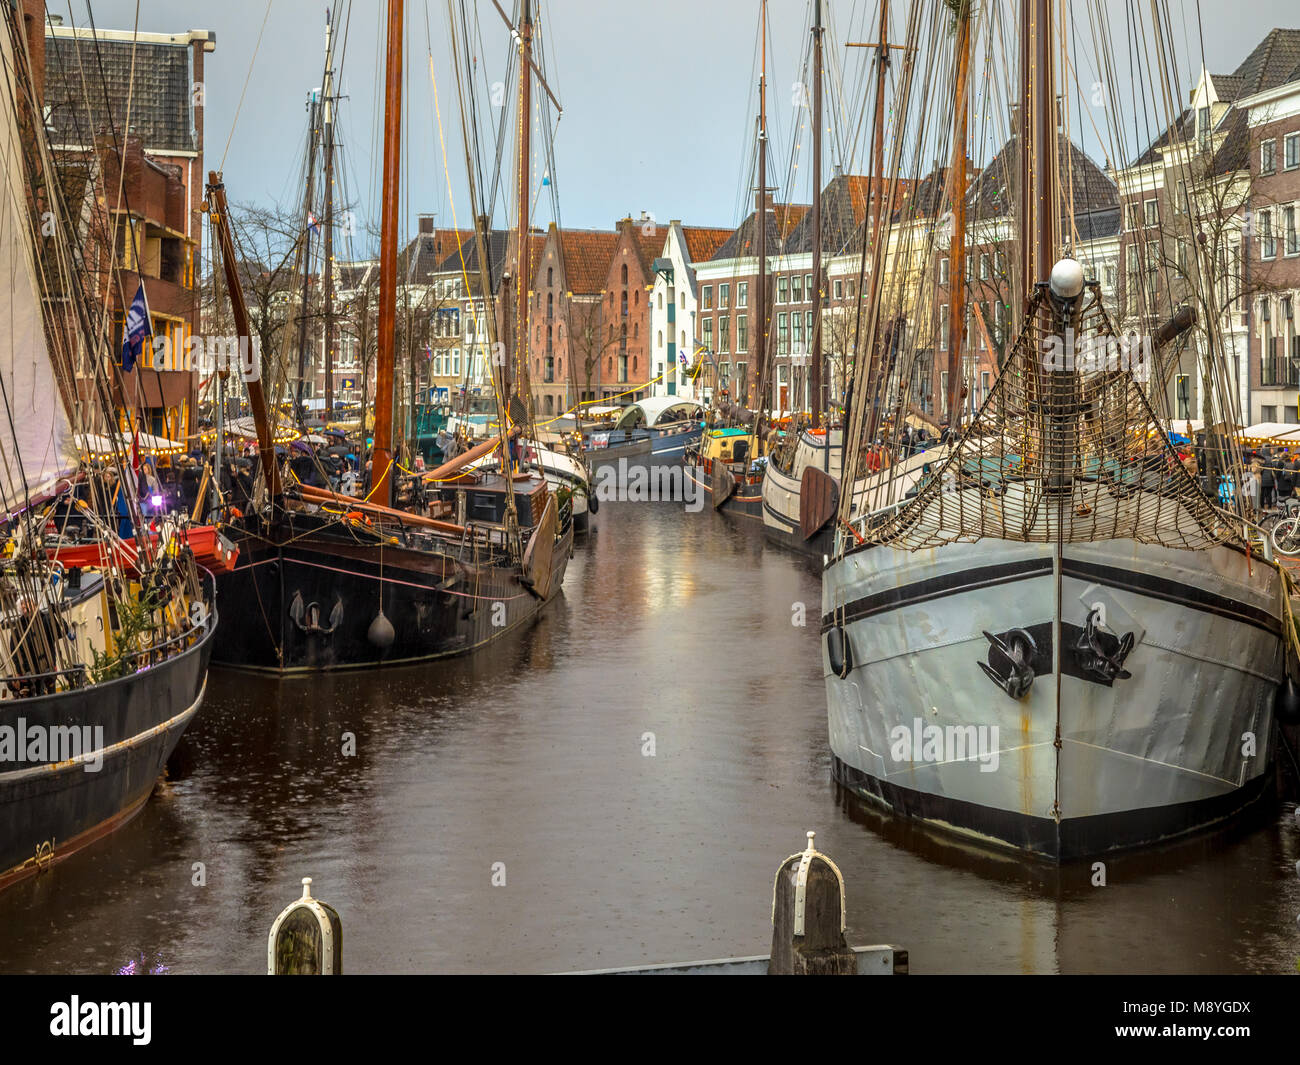 Historic sailing ships at the annual winterwelvaart festival around christmas. reliving the old times on the old quays of Hoge der Aa in Groningen cit Stock Photo